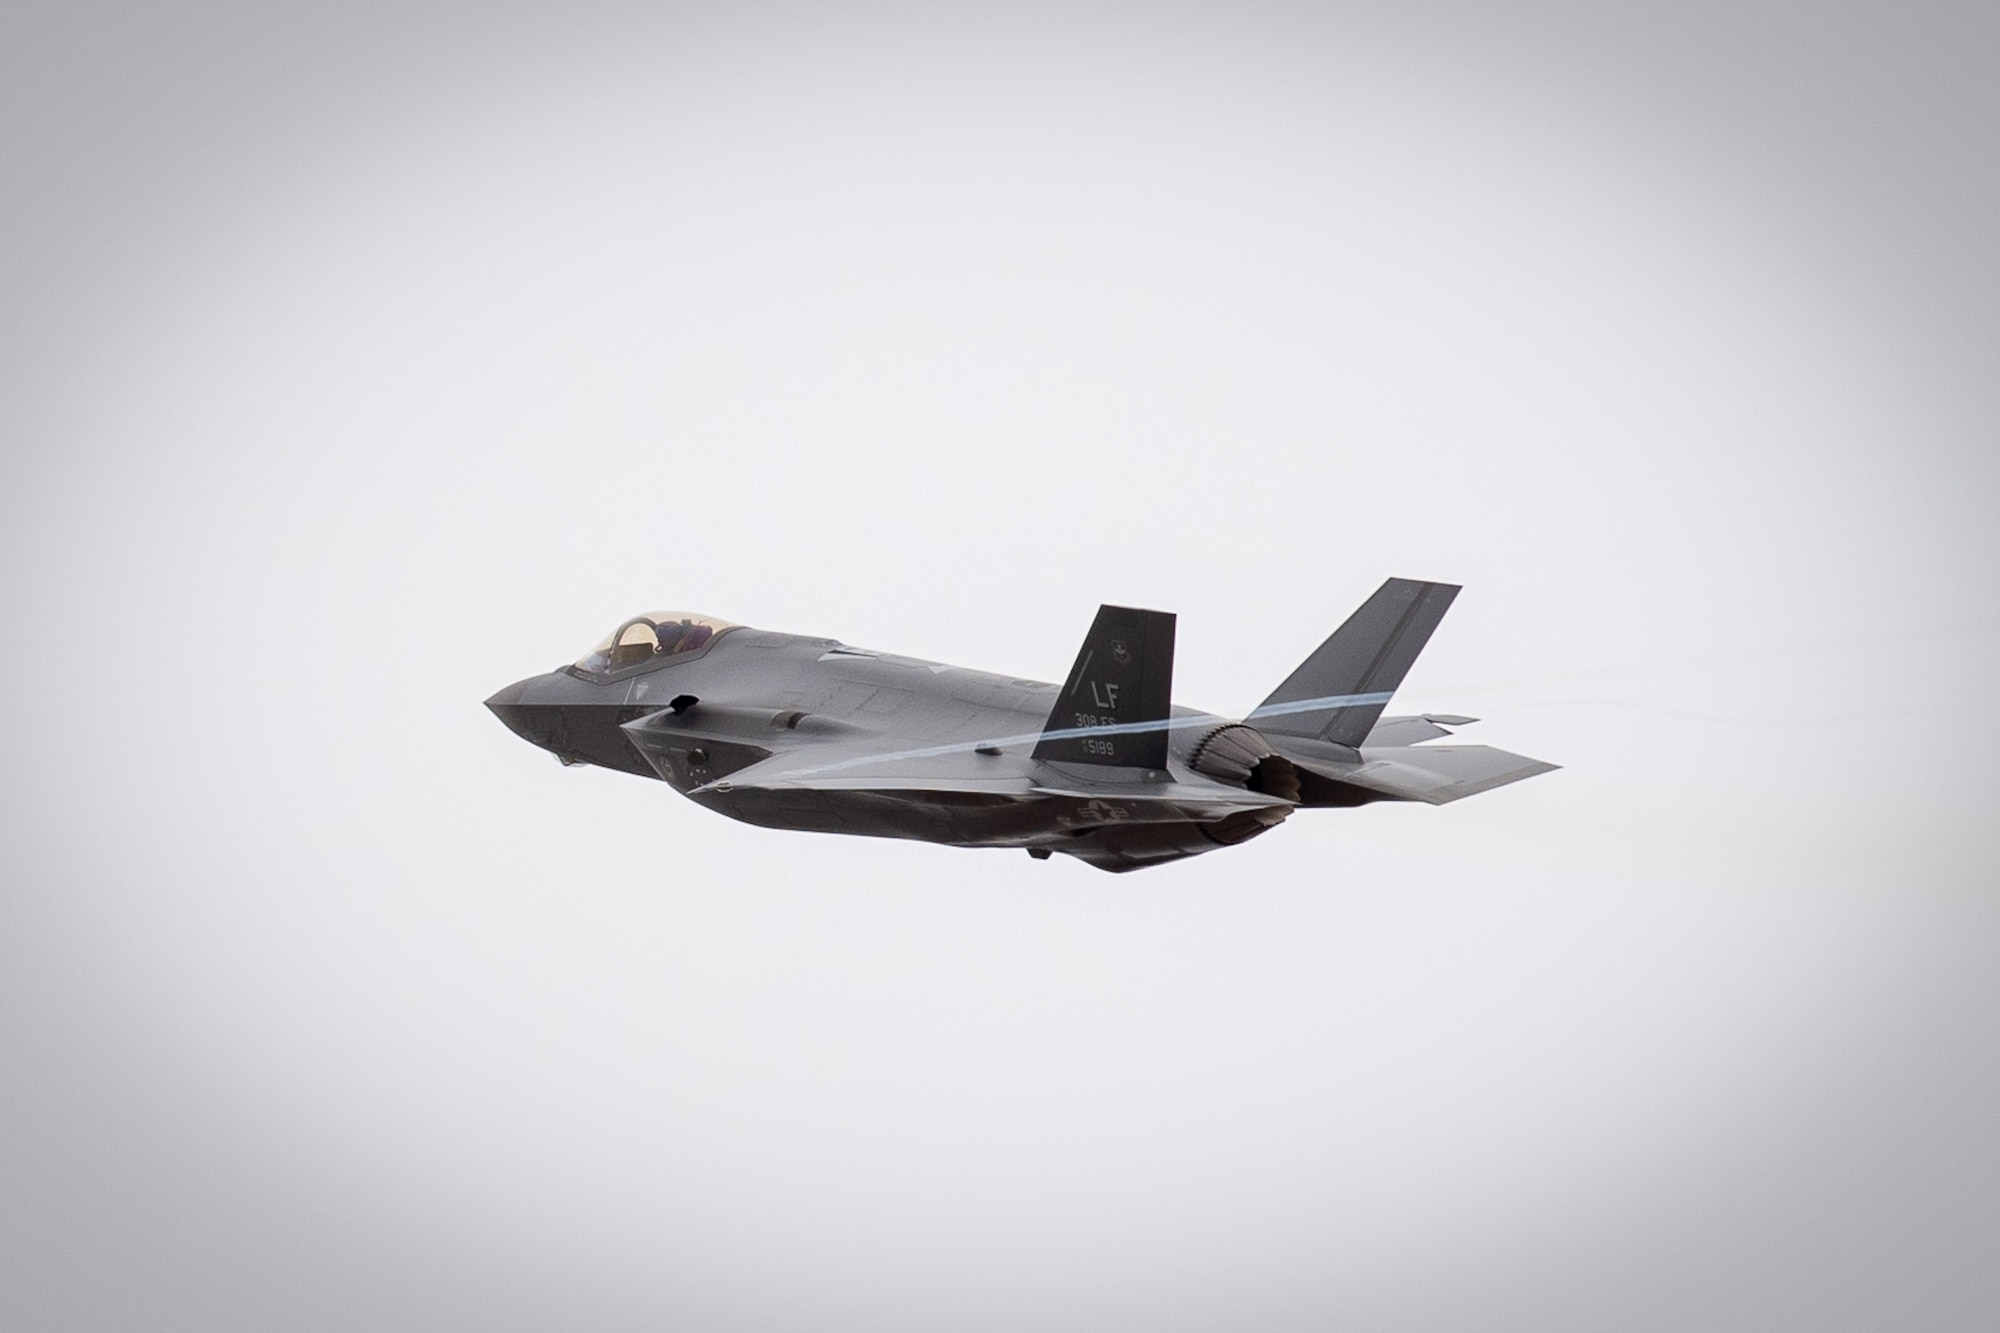 An F-35A Lighting II, assigned to the 62d Fighter Squadron, completes a pass near the control tower, March 27, 2019 at the Barry M. Goldwater Range near Gila Bend, Ariz.